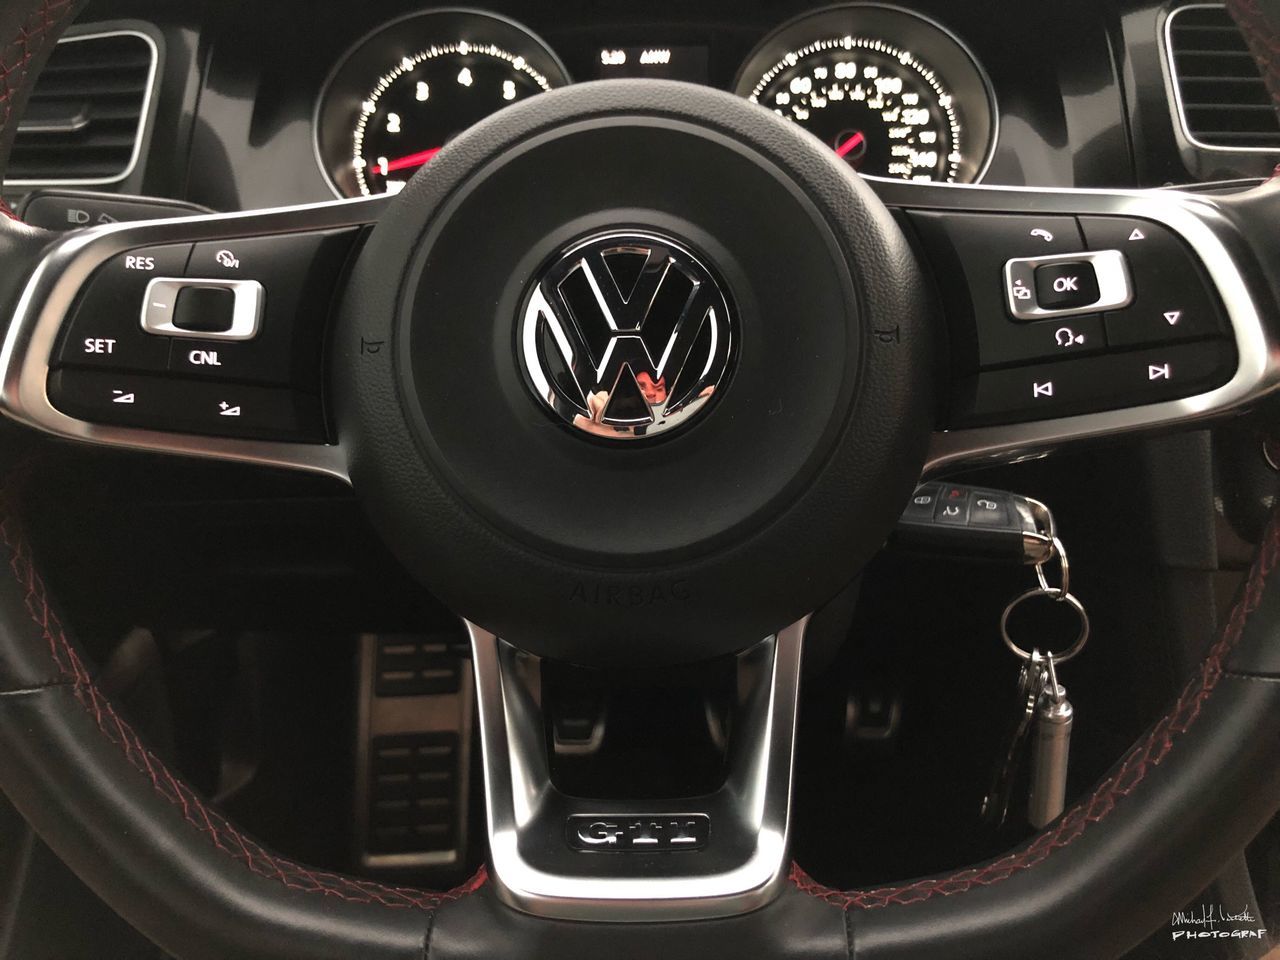 car, land vehicle, transportation, dashboard, mode of transport, control, technology, vehicle part, speed, car interior, modern, black color, no people, luxury, close-up, speedometer, gauge, outdoors, day, cockpit